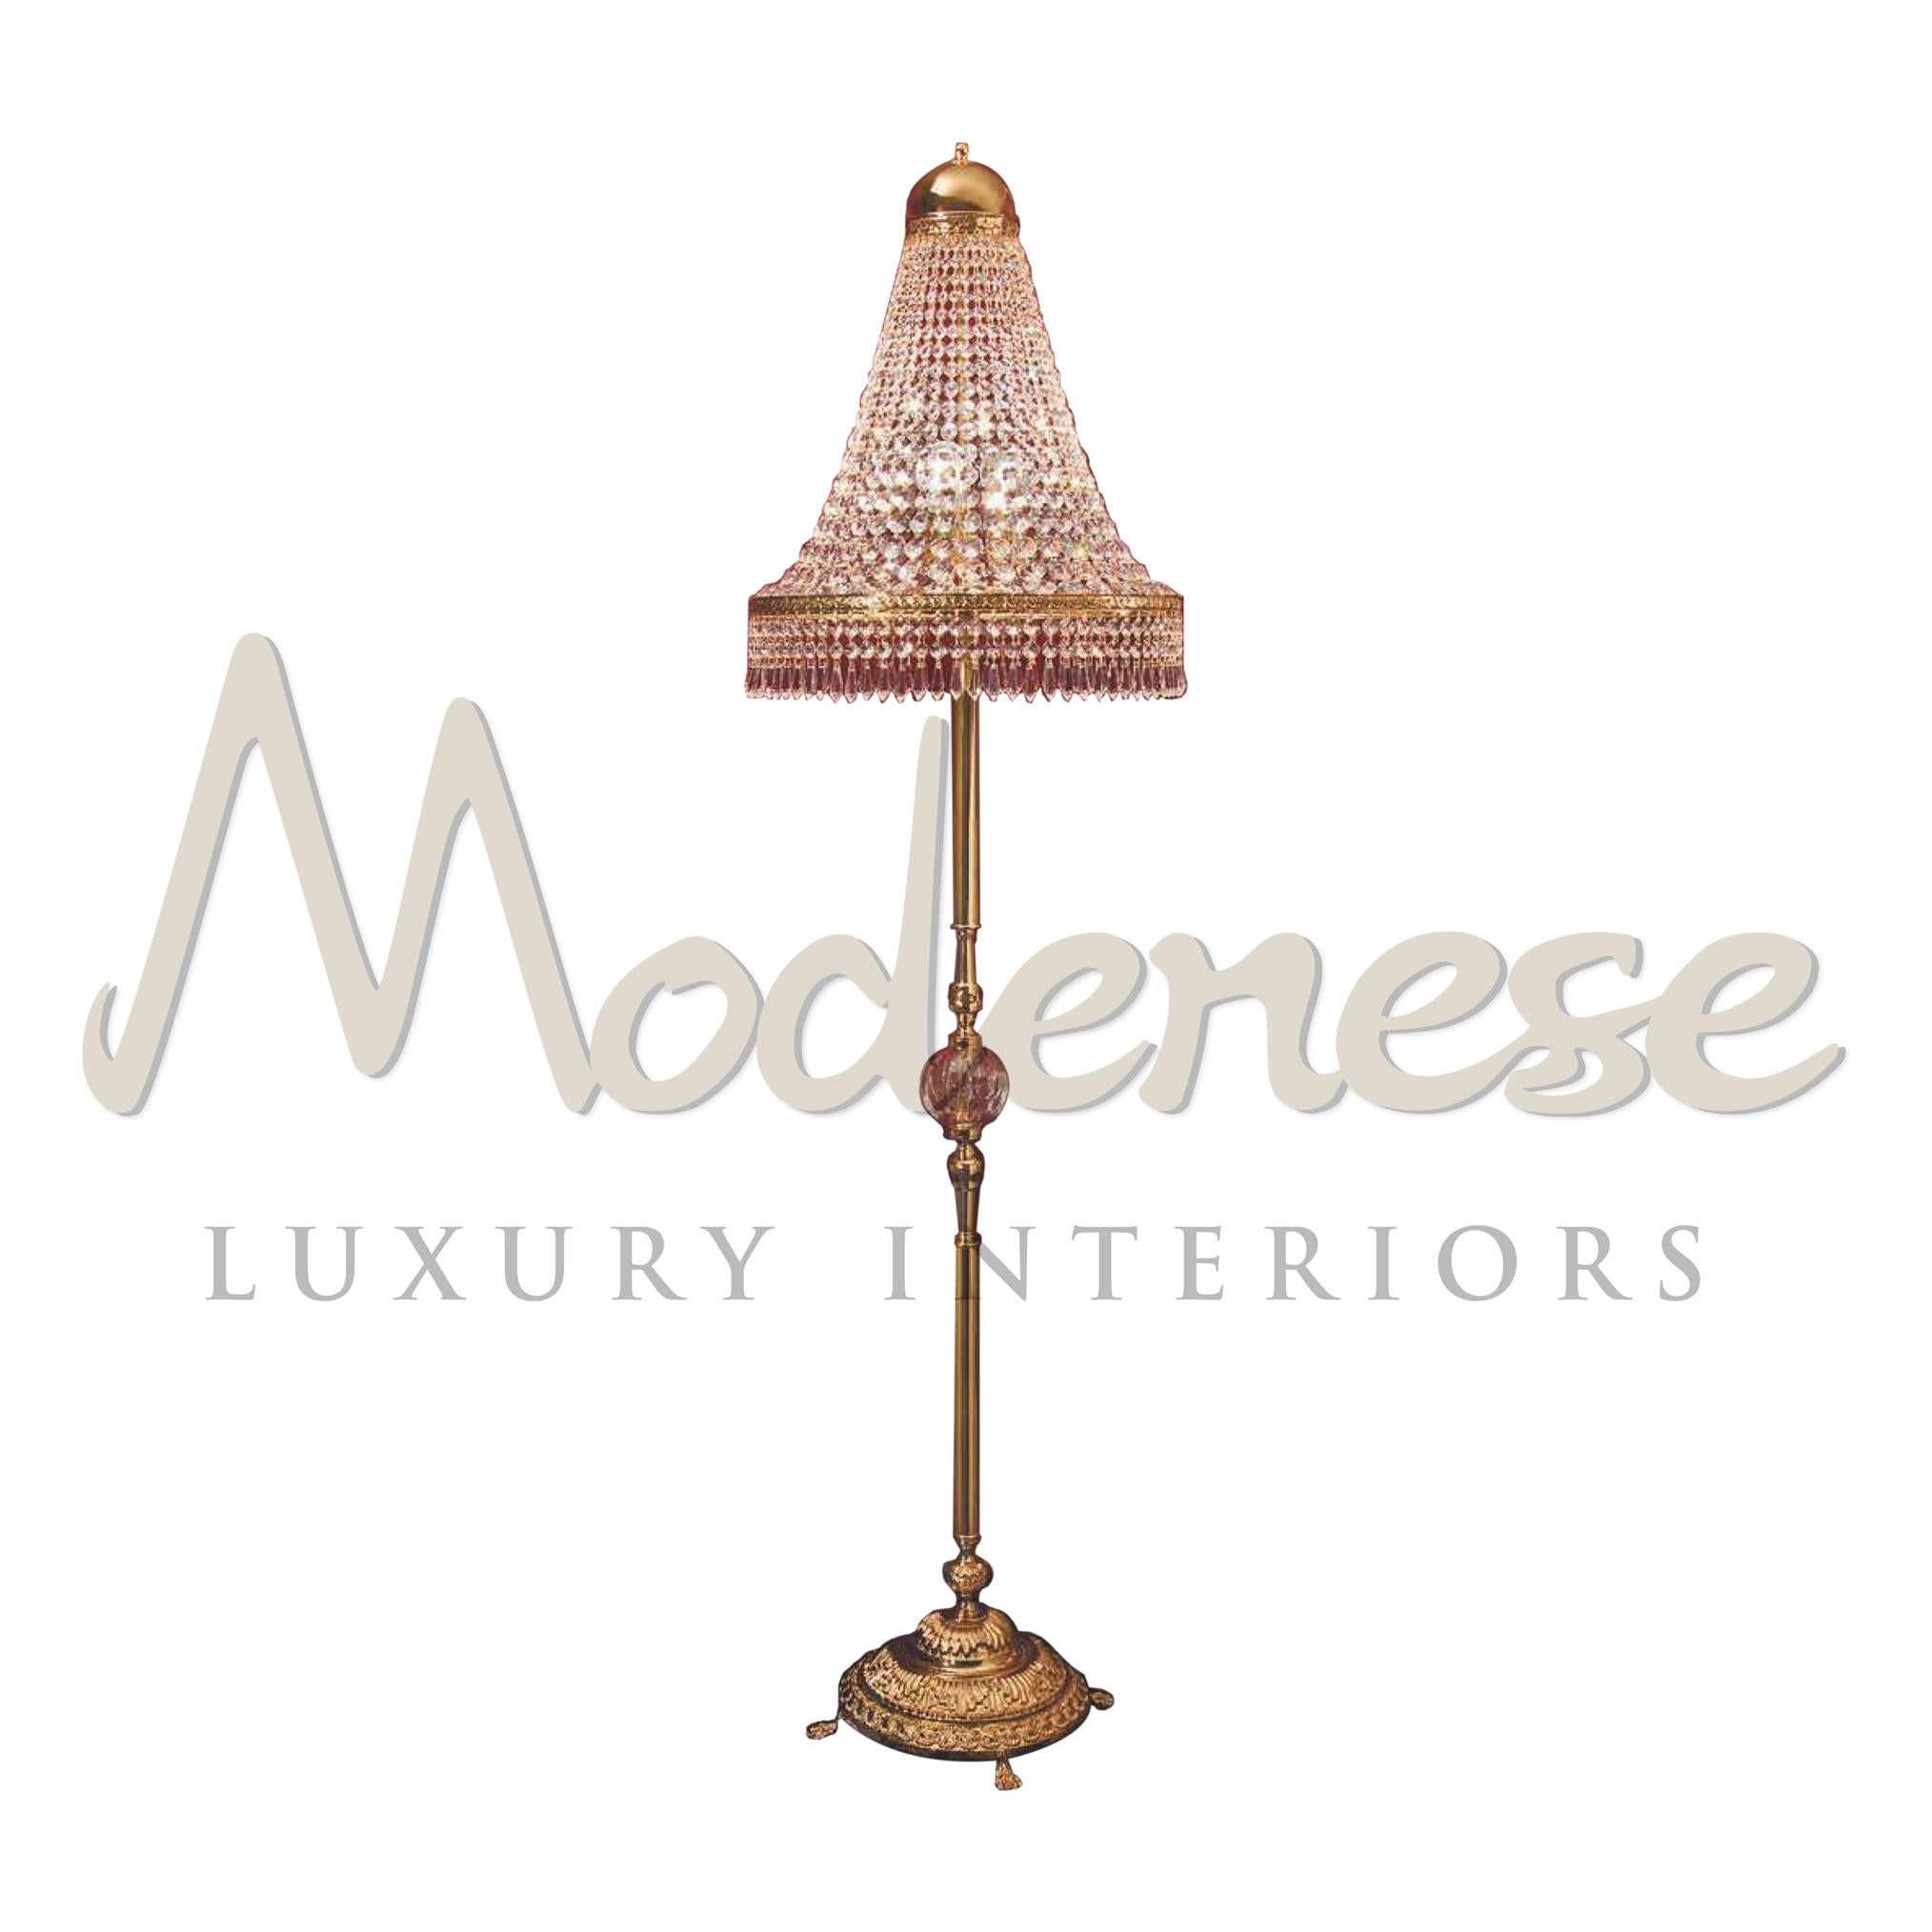 This Modenese Luxury Interiors 3 light stand floor lamp combines elegance and richness. Handcrafted brass base is finished in 24kt gold plate and crowned with scholer crystals which add a beautiful accent. This model requires 3 single E14 screw fit